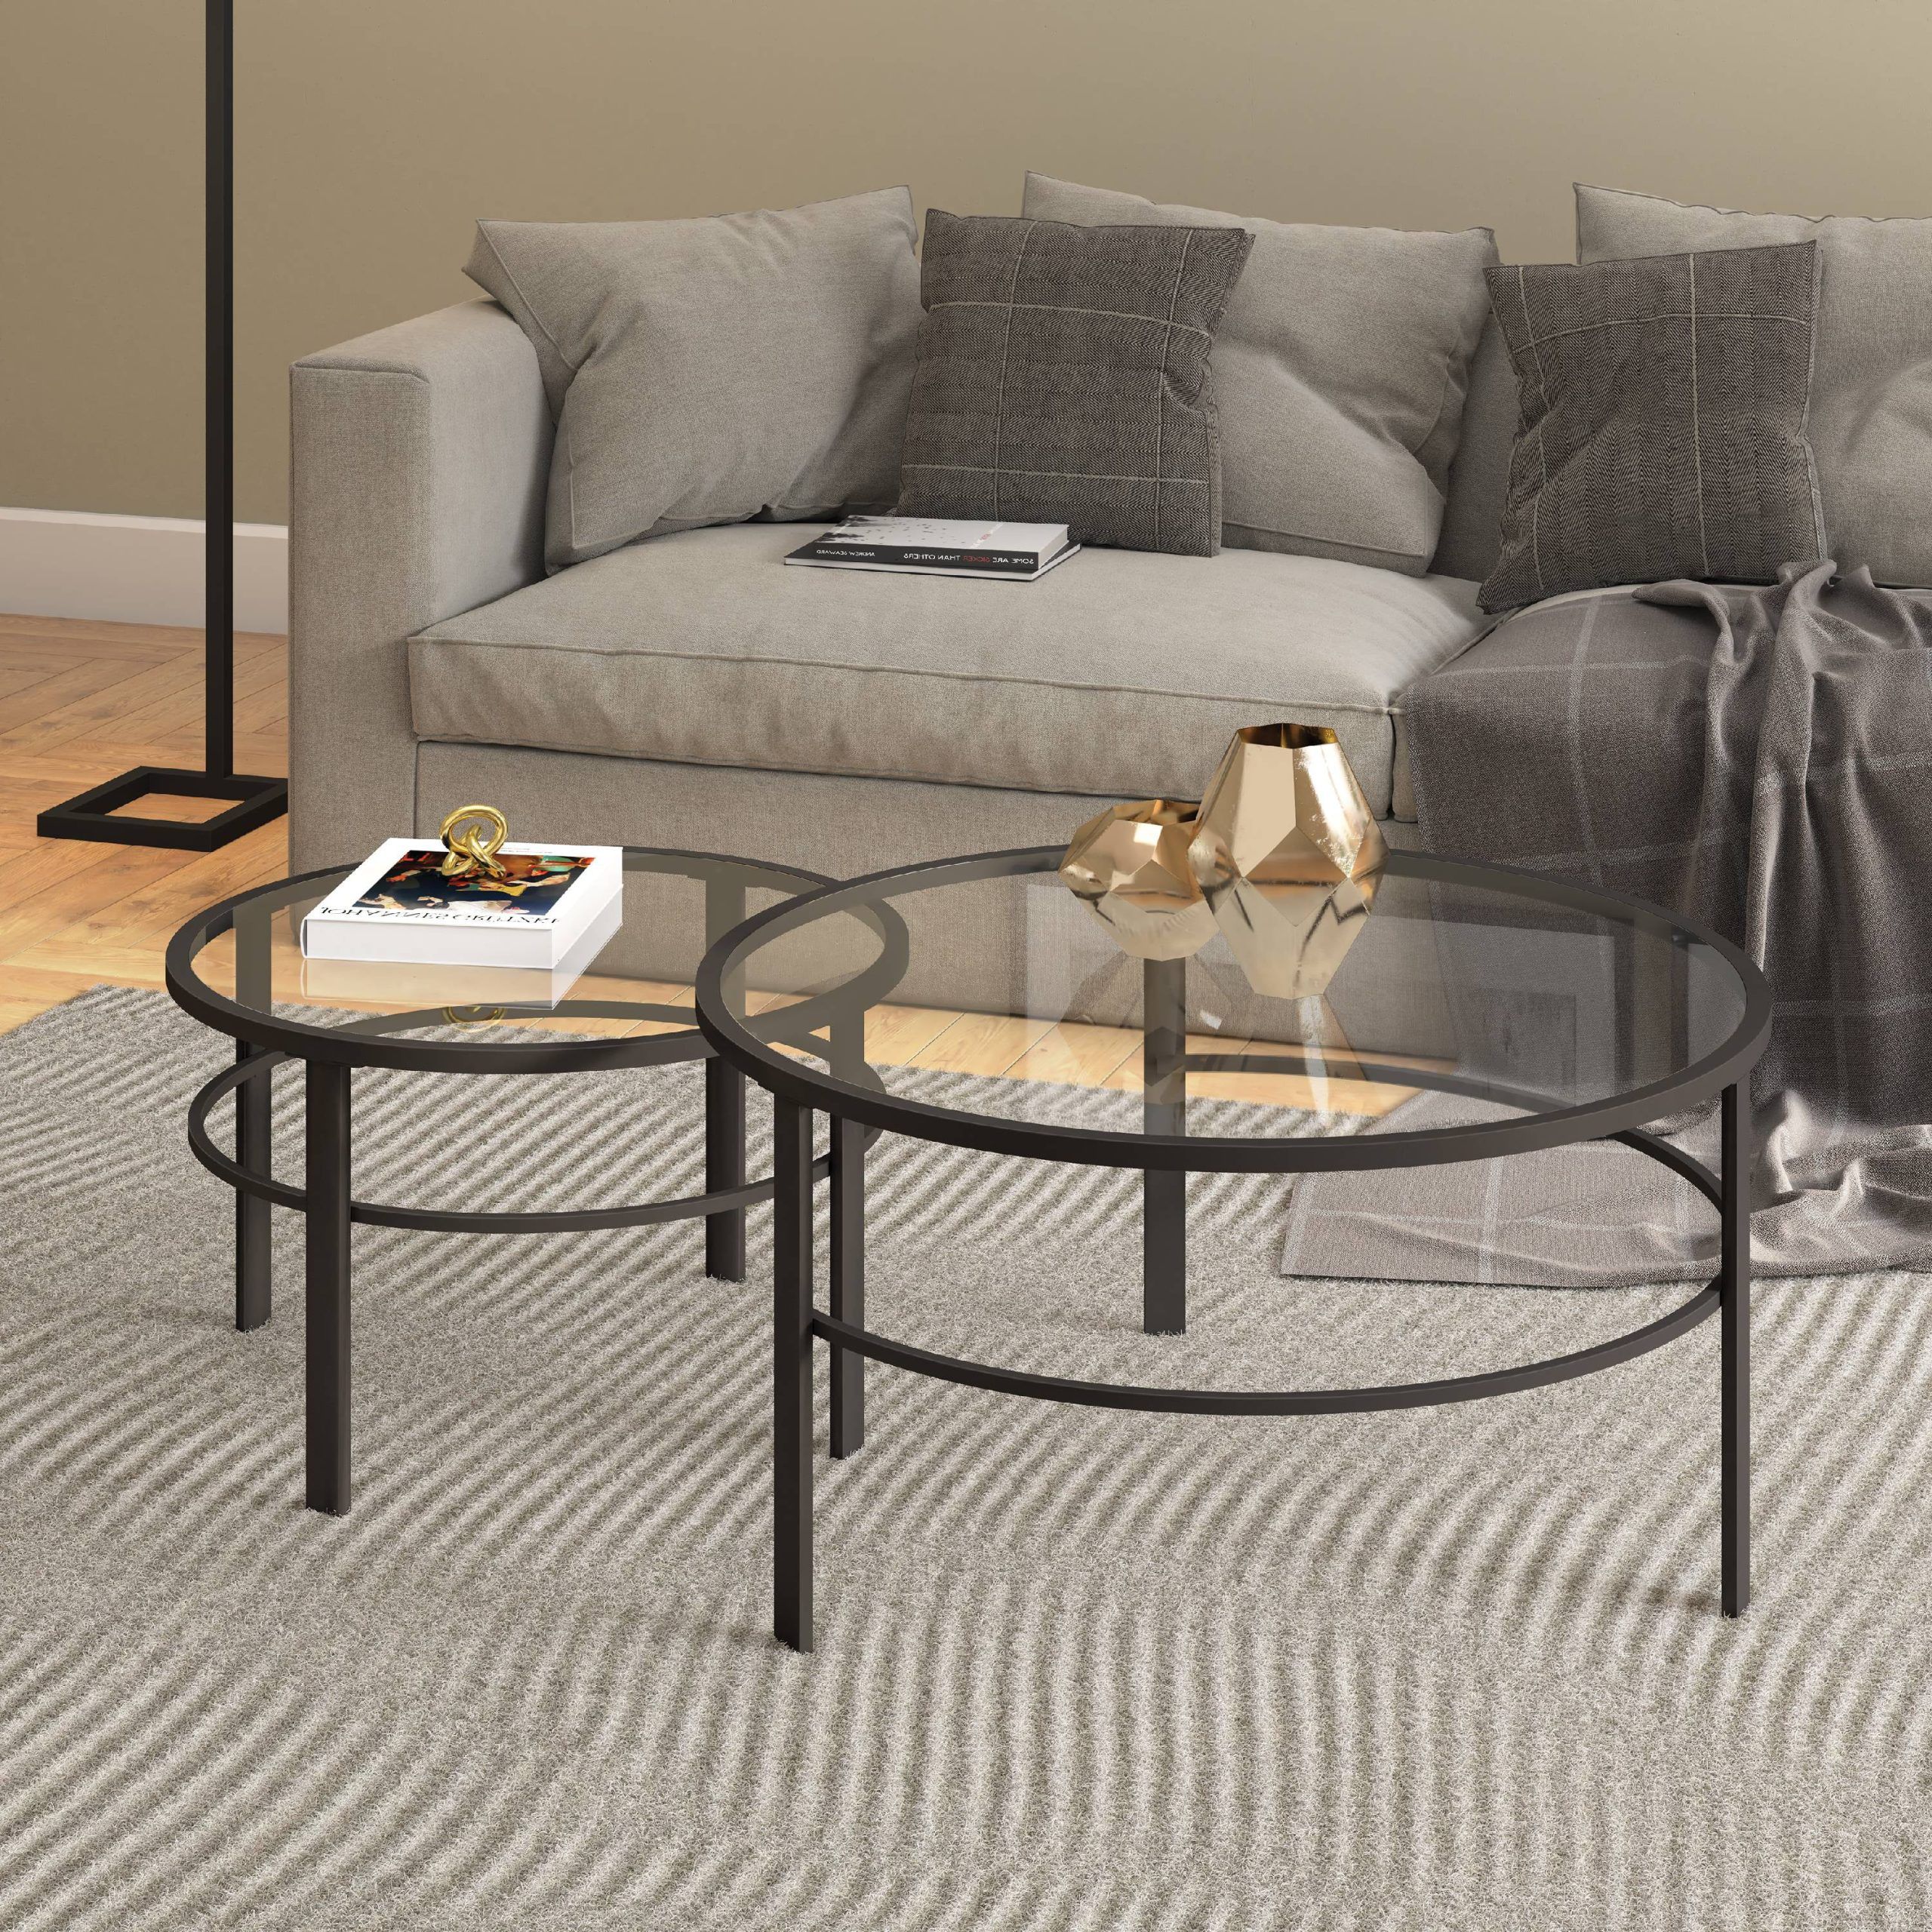 Most Popular Modern Nesting Coffee Tables Pertaining To Evelyn&zoe Contemporary Nesting Coffee Table Set With Glass Top (Photo 4 of 15)